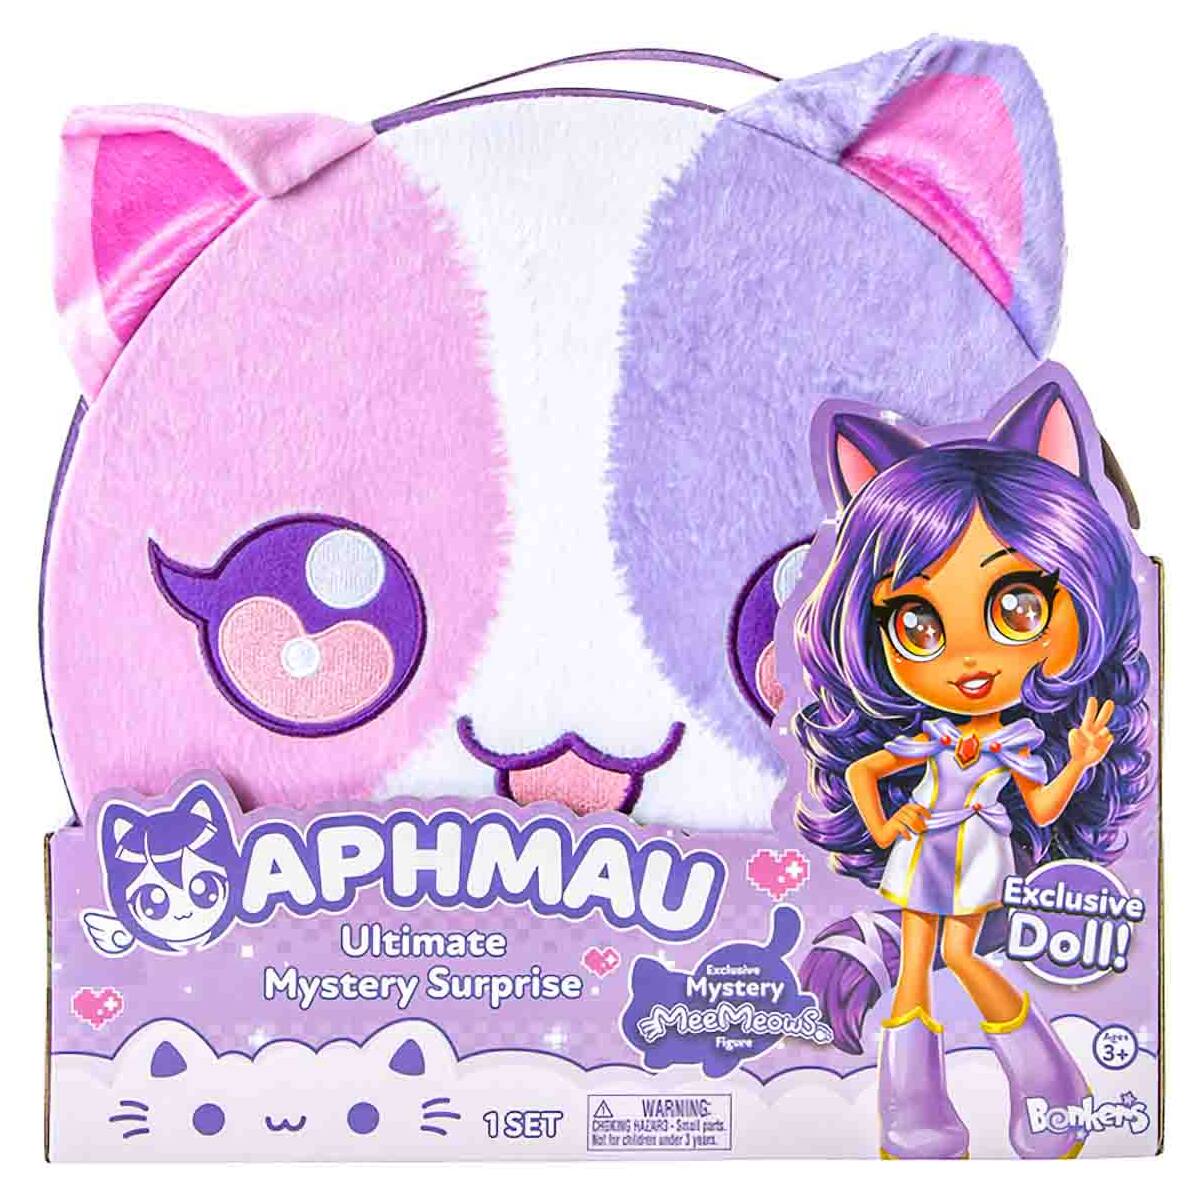 Aphmau™ Sparkle Edition Fashion Doll Blind Bag - Styles May Vary